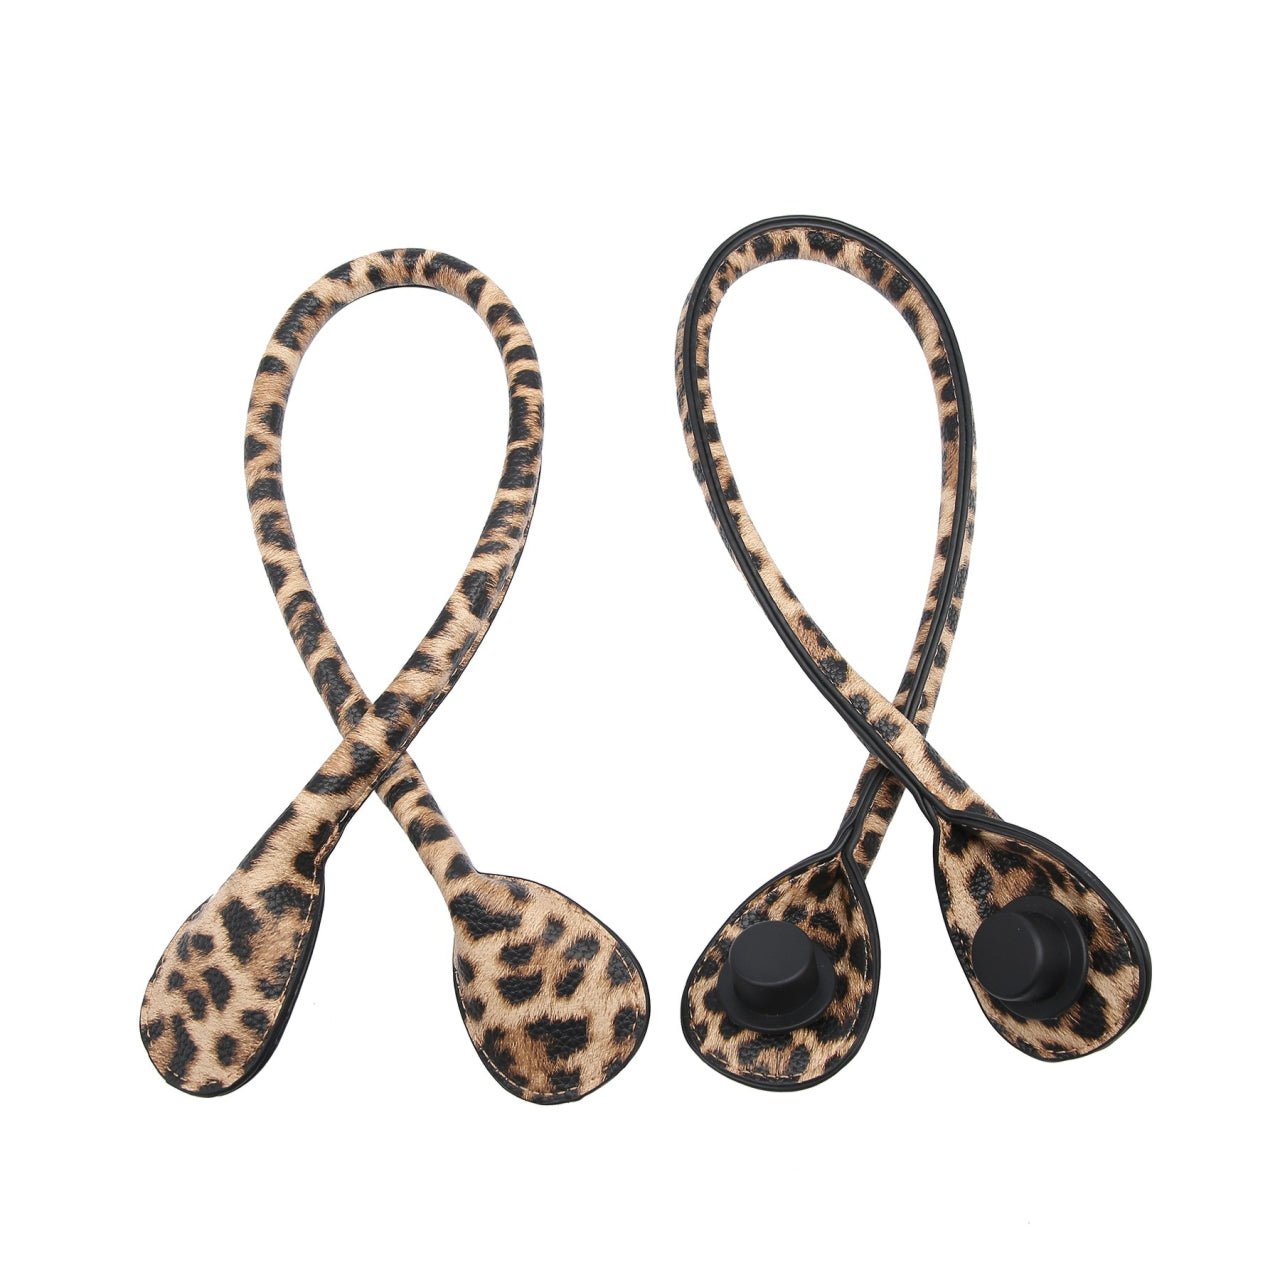 Leopard Vegan Leather Versa Tote Straps - The Graphic Tee